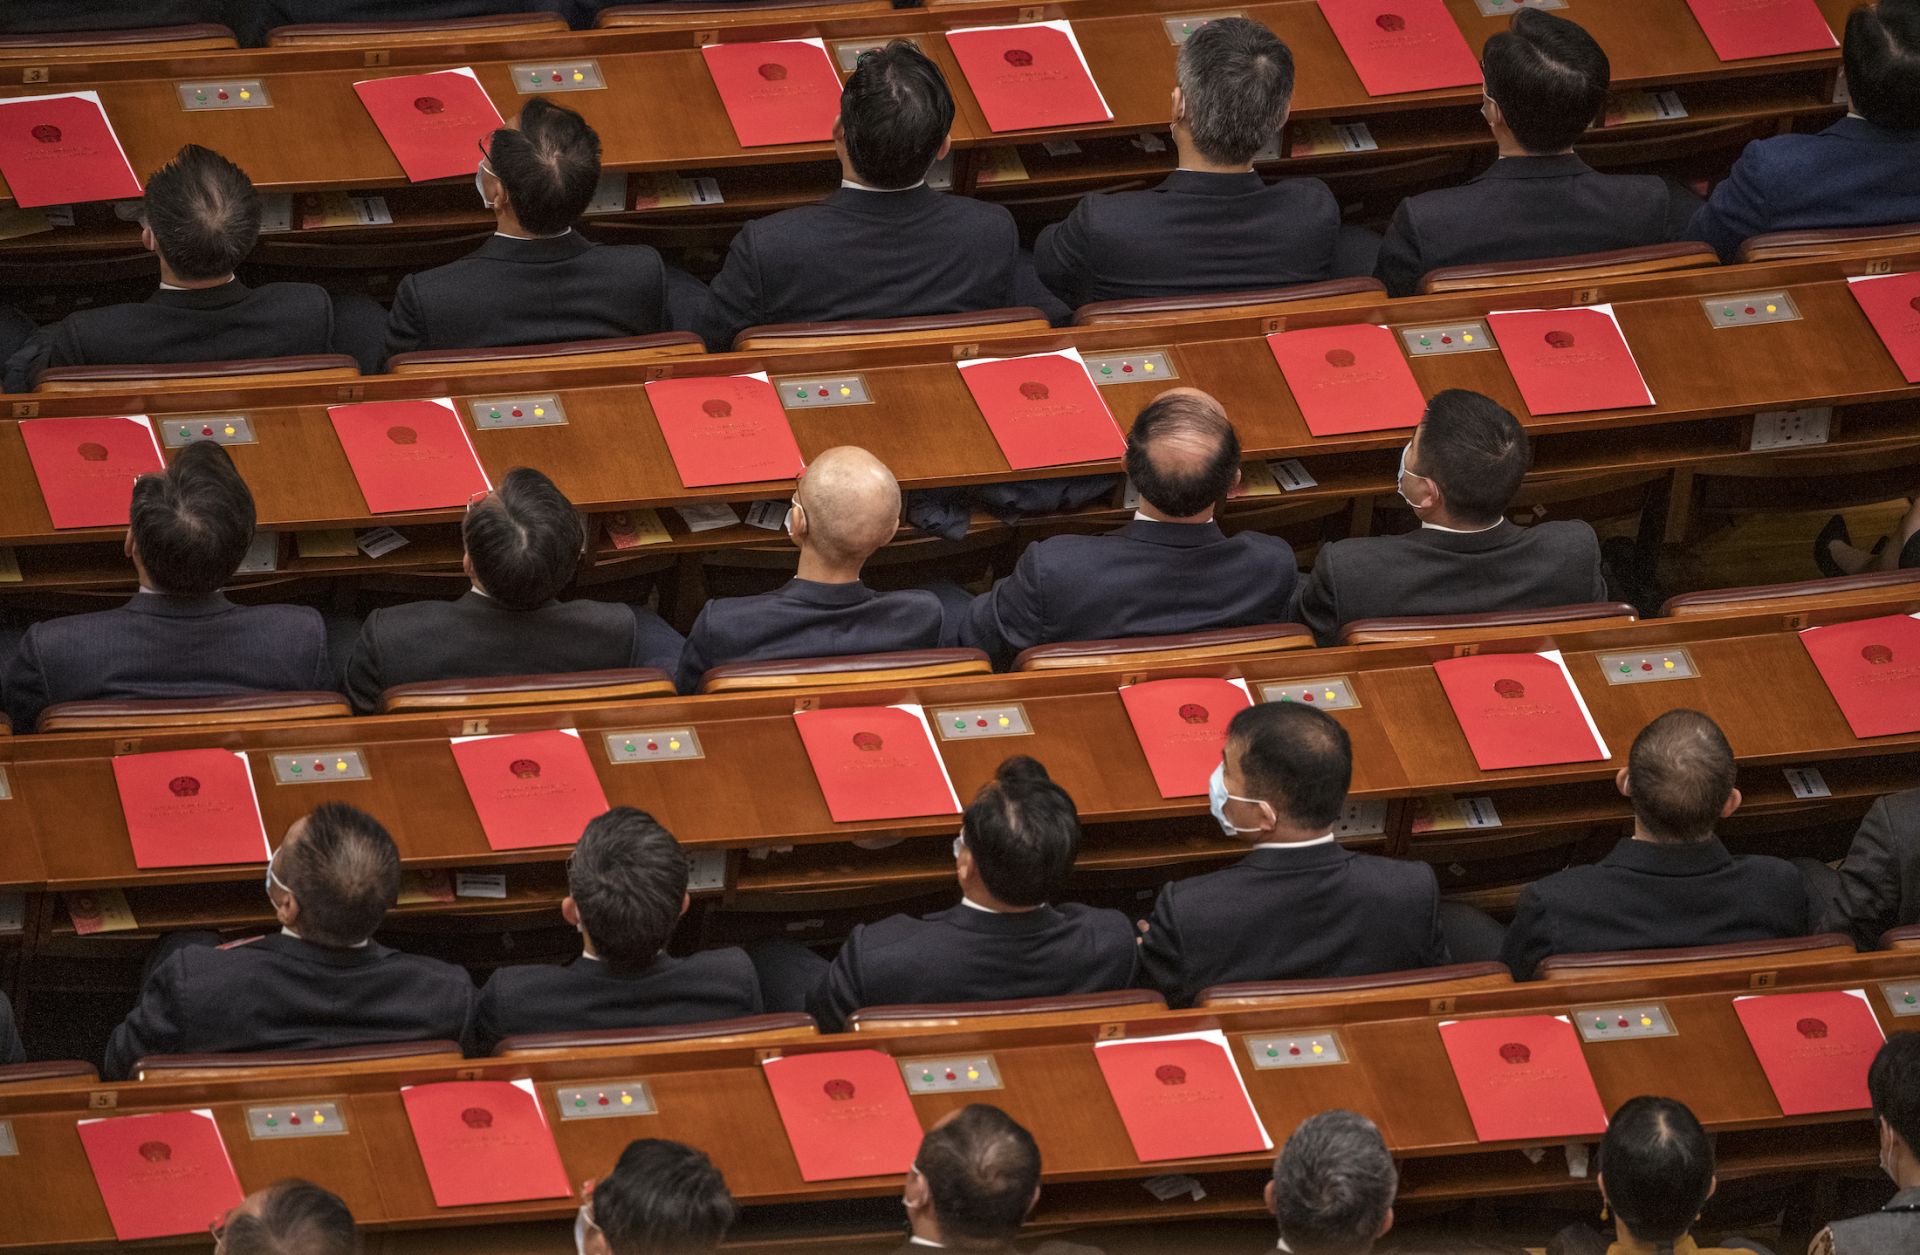 Delegates vote on resolutions during the closing session of China's National People's Congress on March 11, 2021.